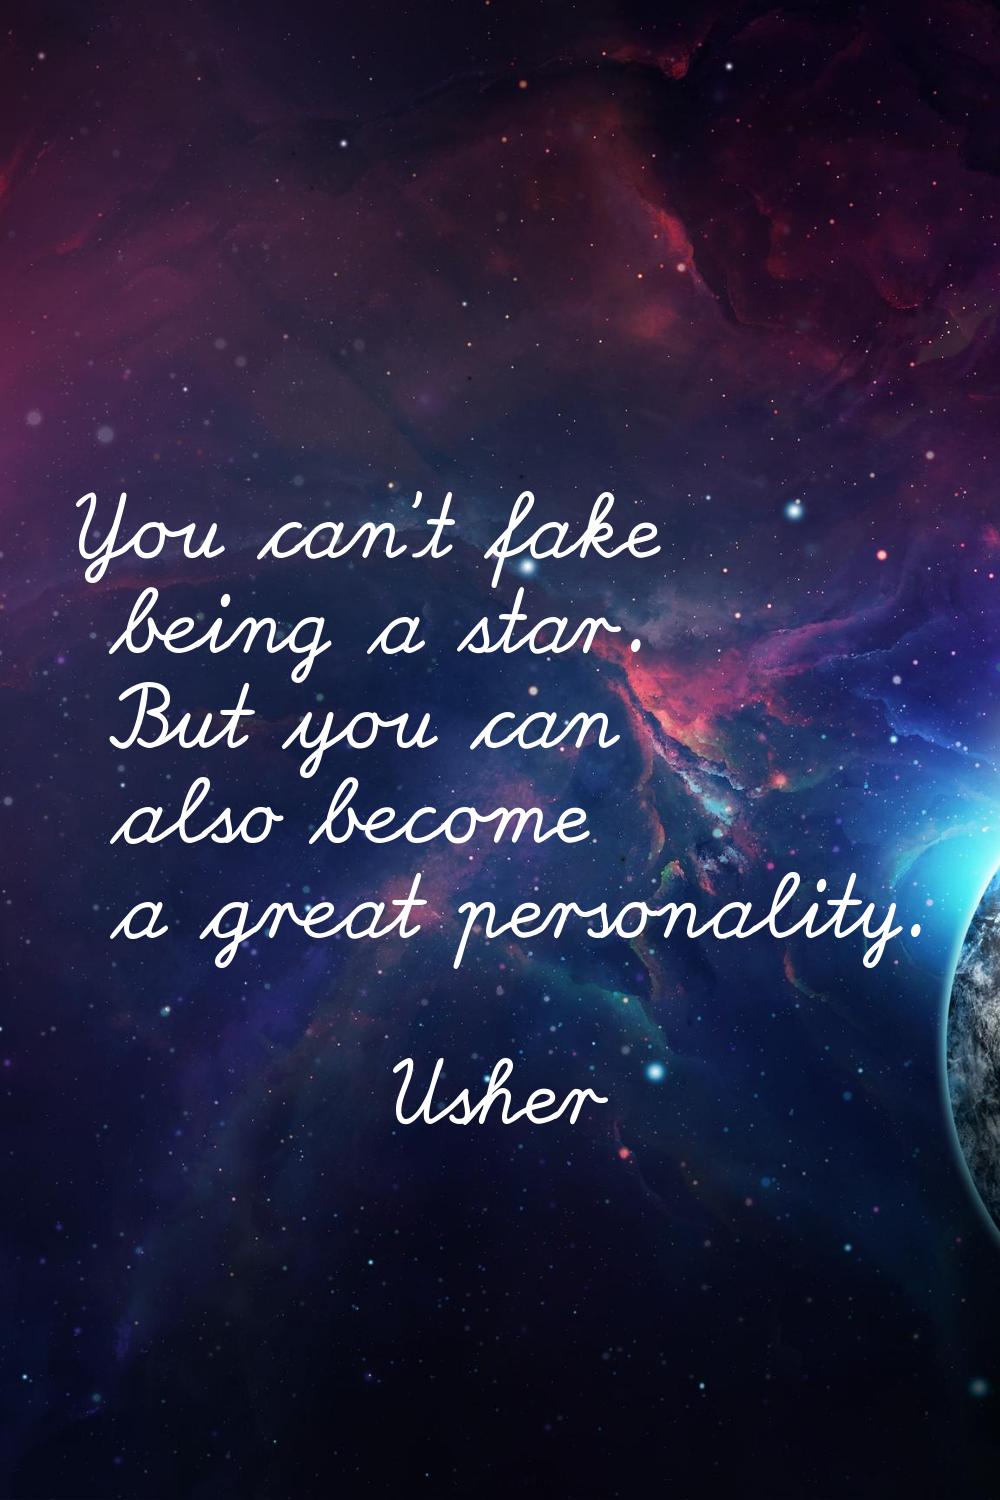 You can't fake being a star. But you can also become a great personality.